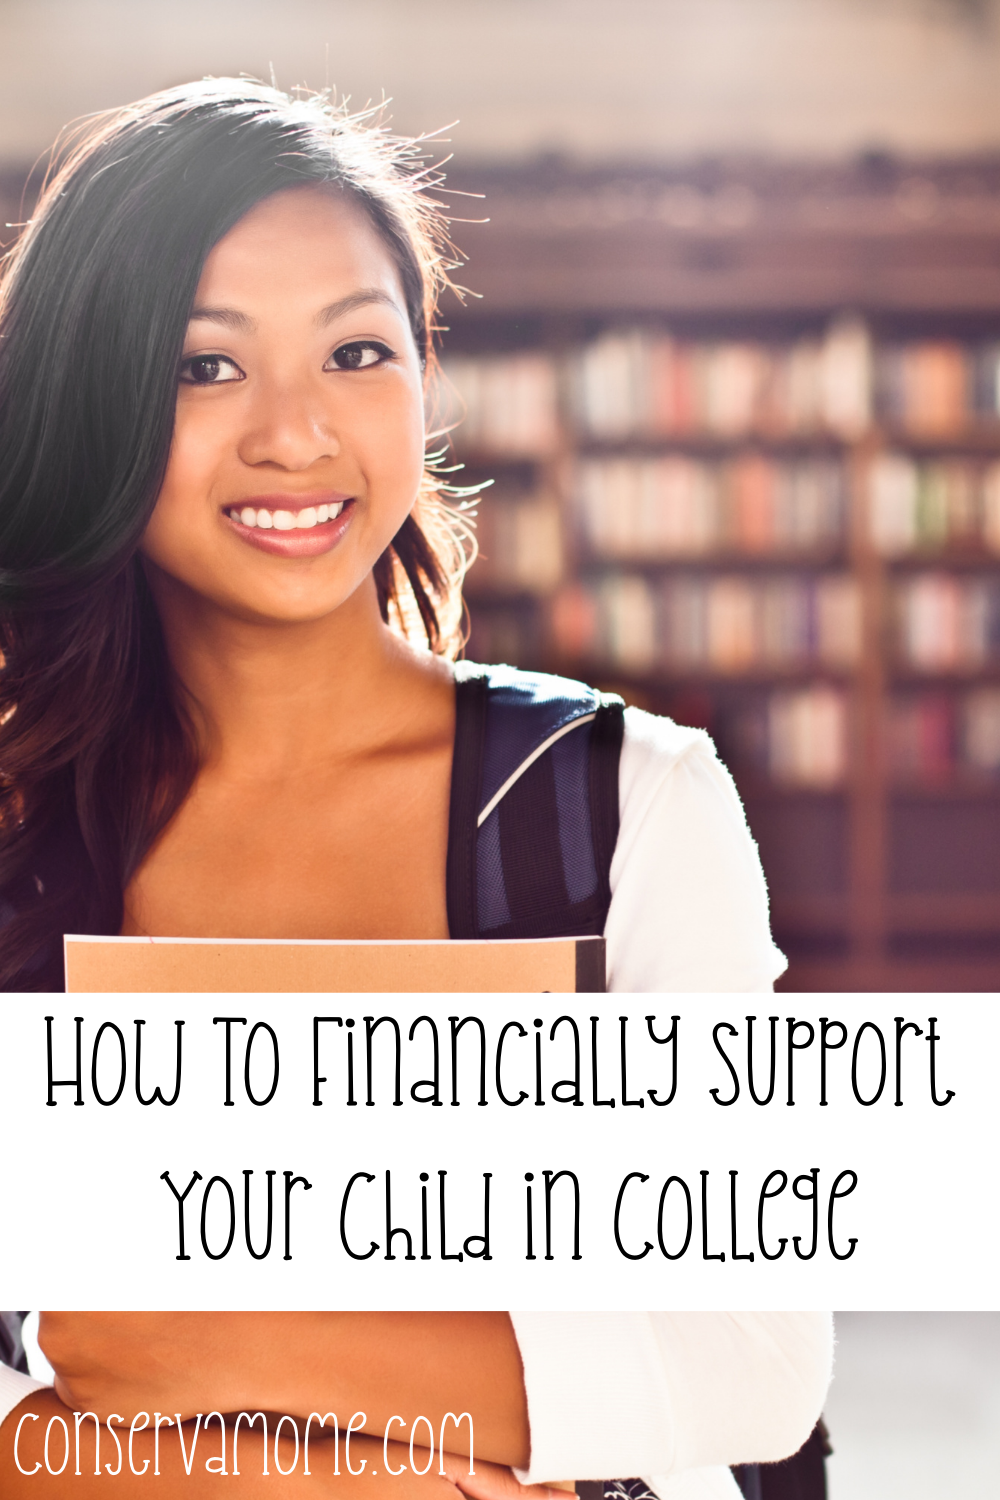 How to financially support your child in college